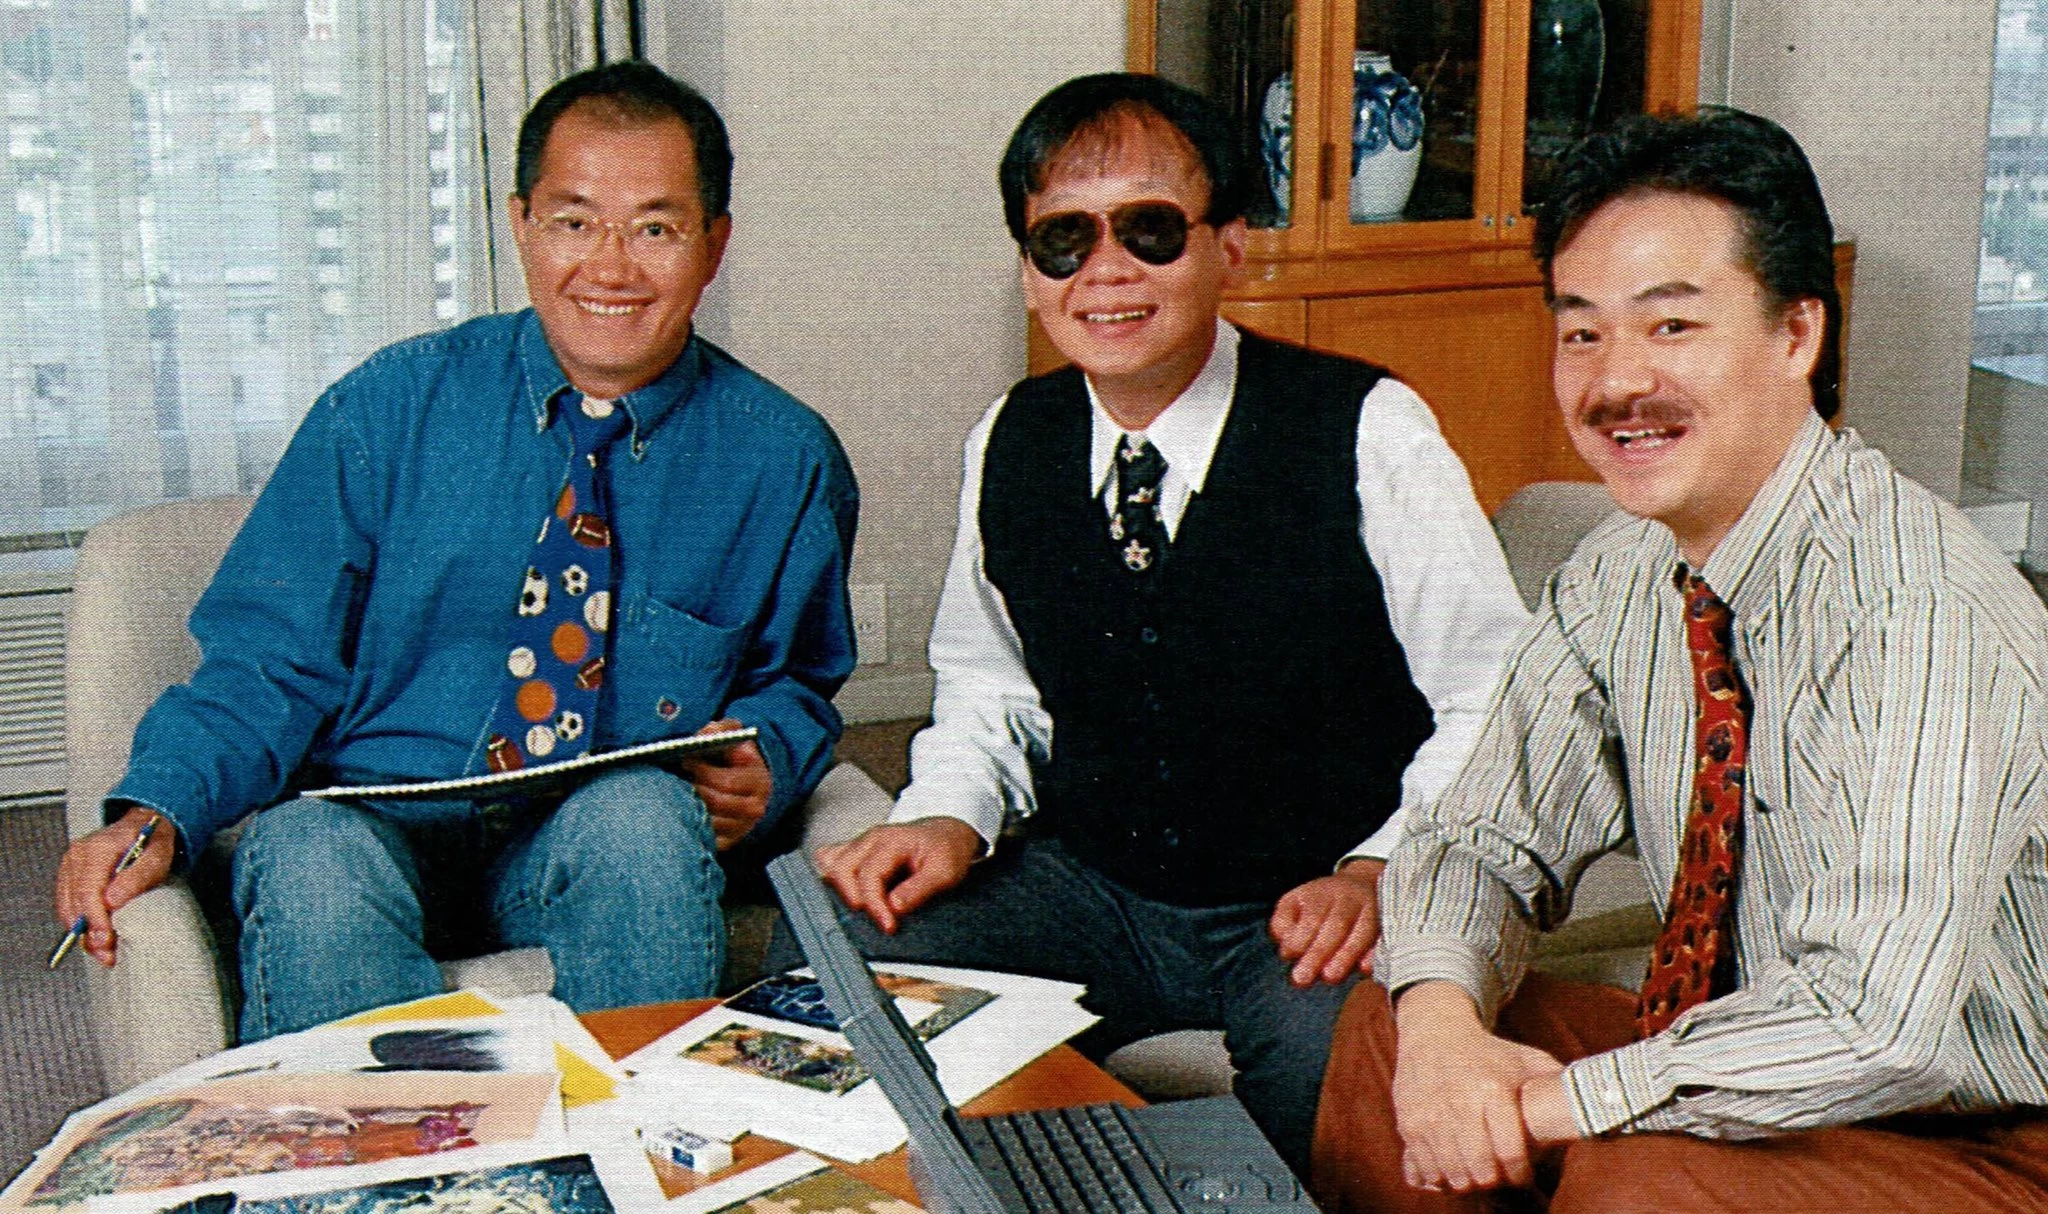 Team photo of the developers of the game Chrono Trigger